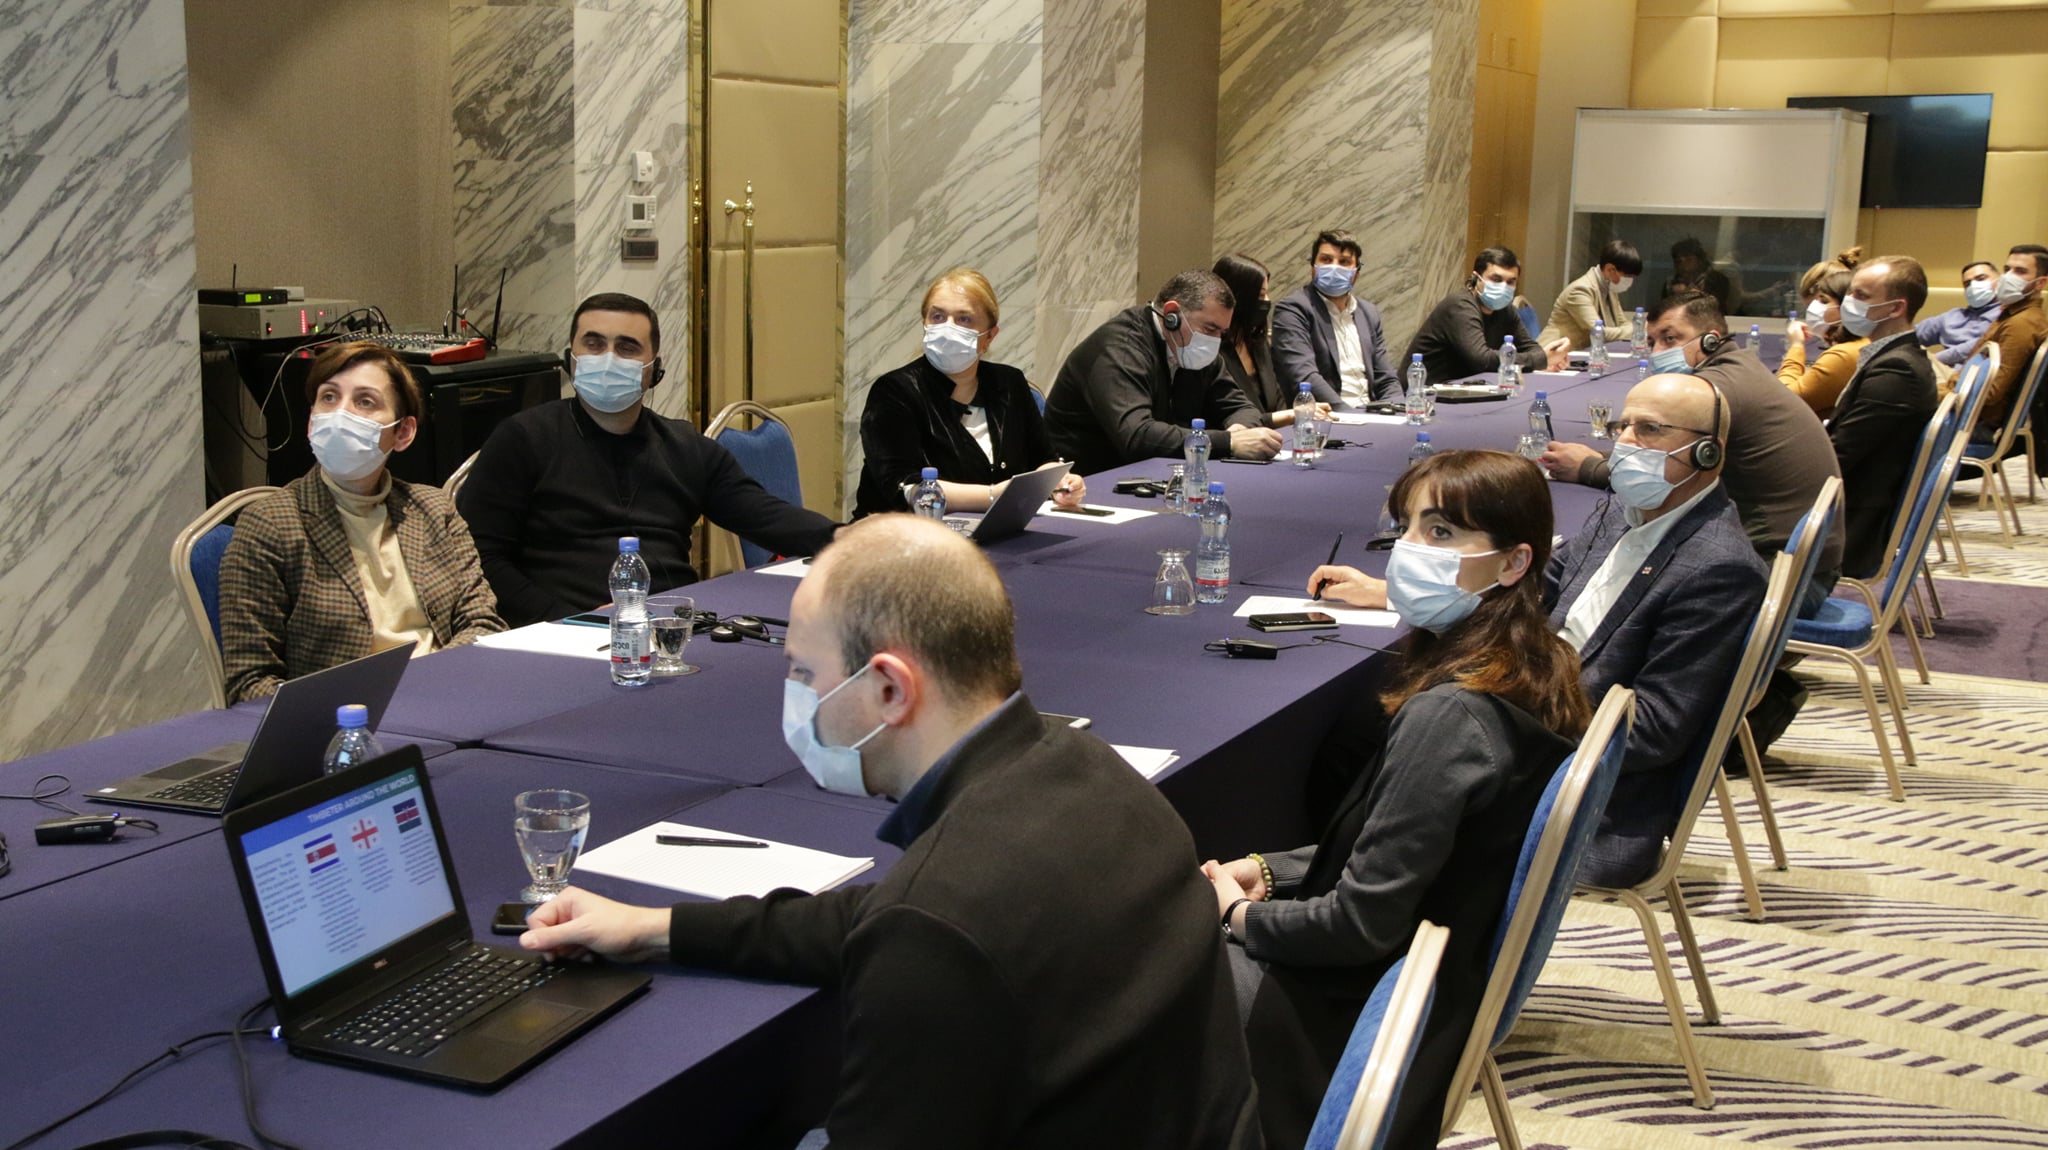 The presentation of the electronic timber resource management system program was held in Tbilisi